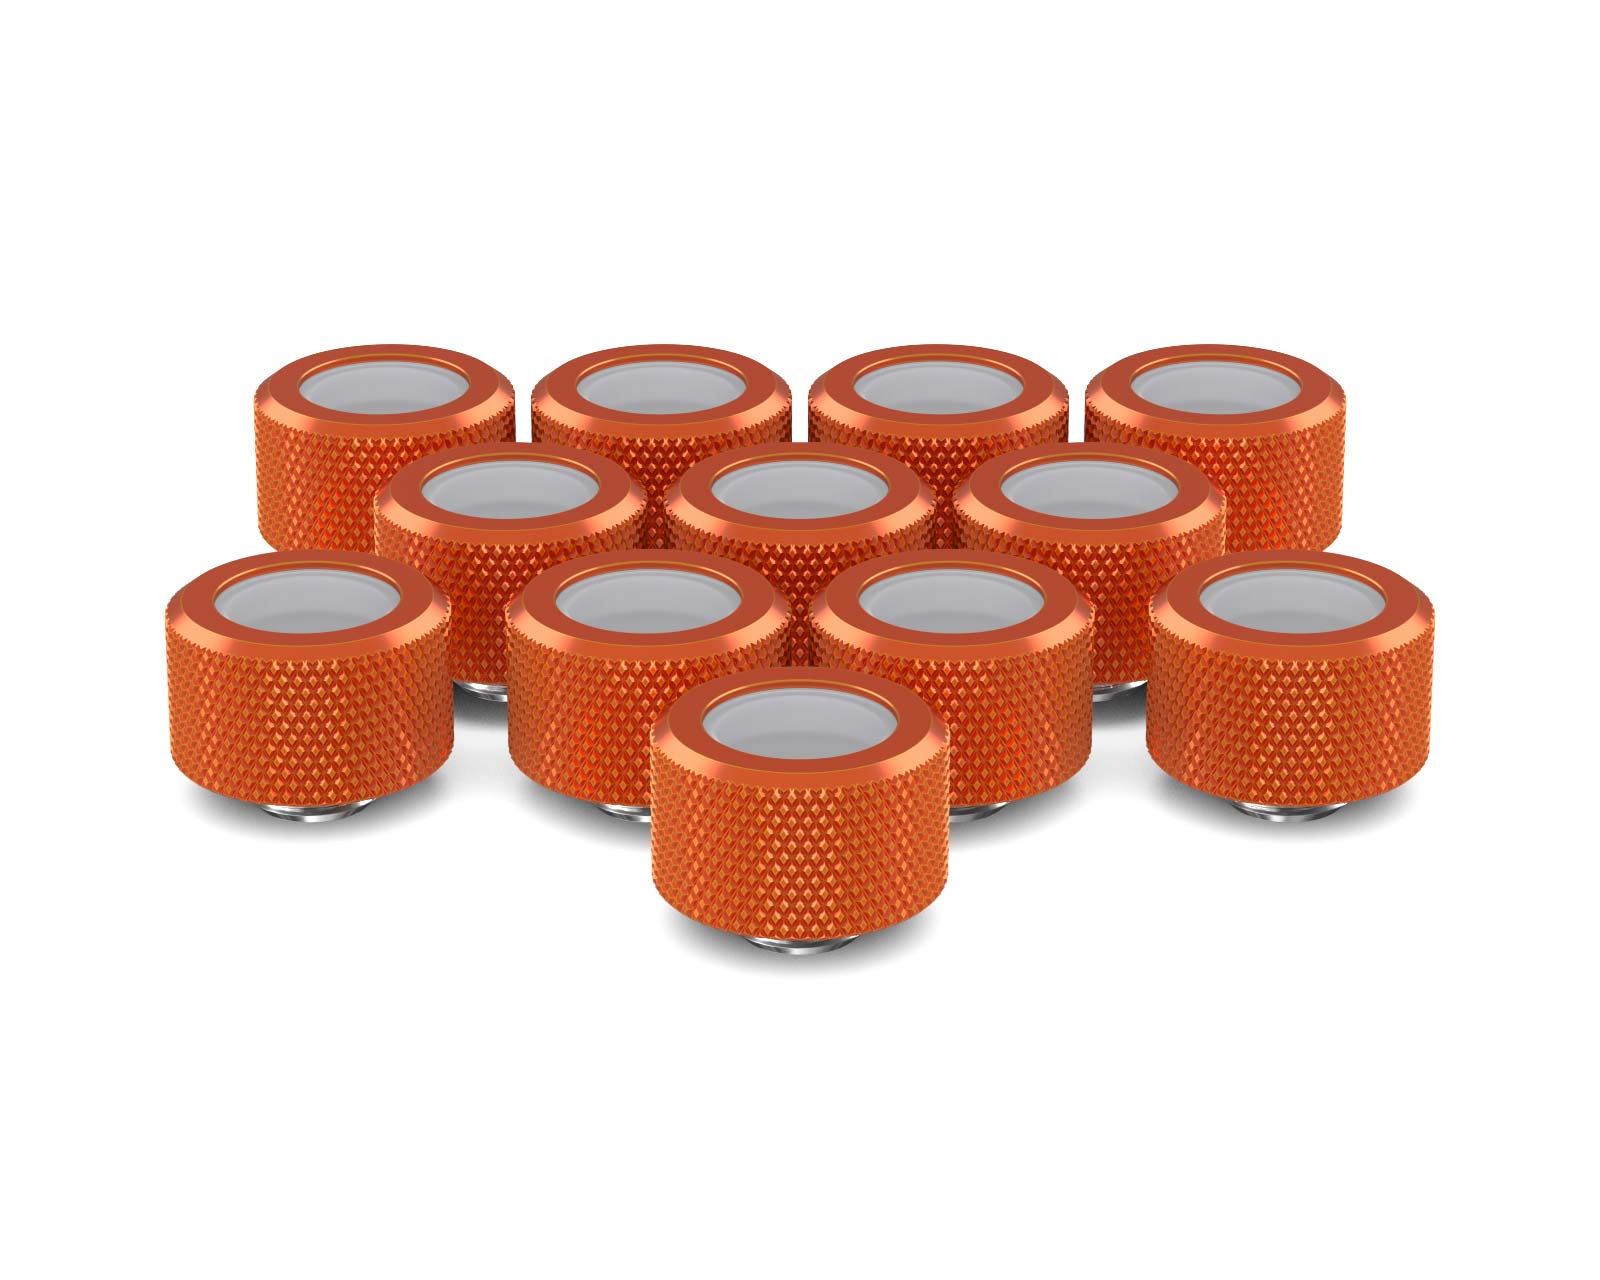 PrimoChill 16mm OD Rigid SX Fitting - 12 Pack - PrimoChill - KEEPING IT COOL Candy Copper